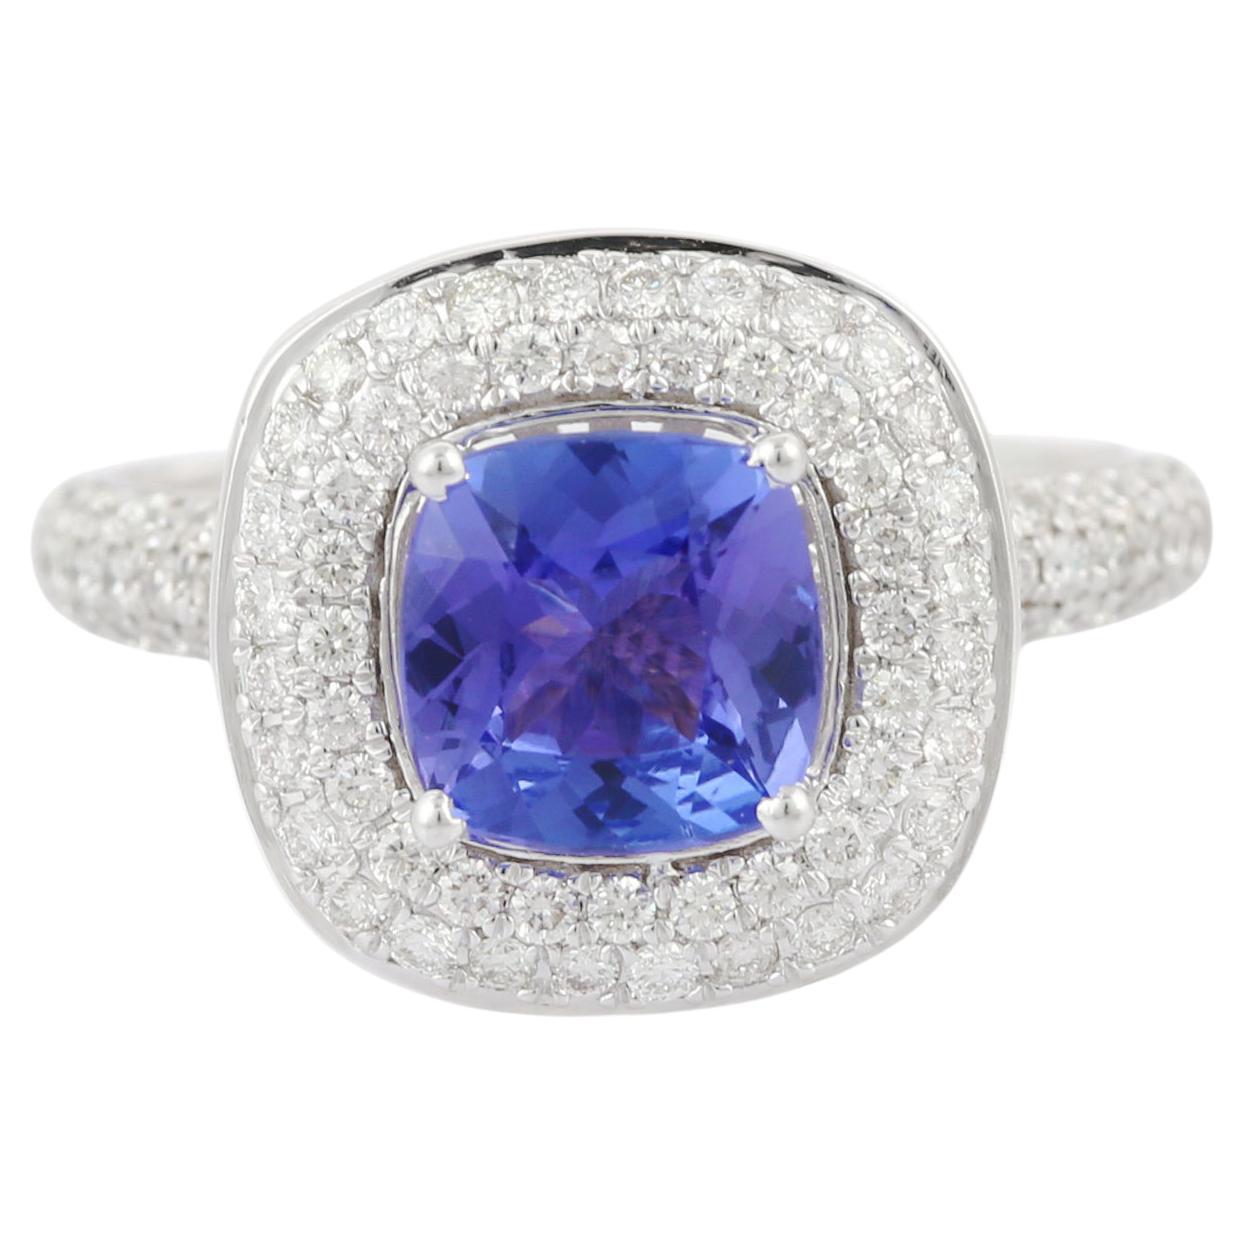 For Sale:  Tanzanite Gemstone Engagement Ring with Diamonds in 18K White Gold